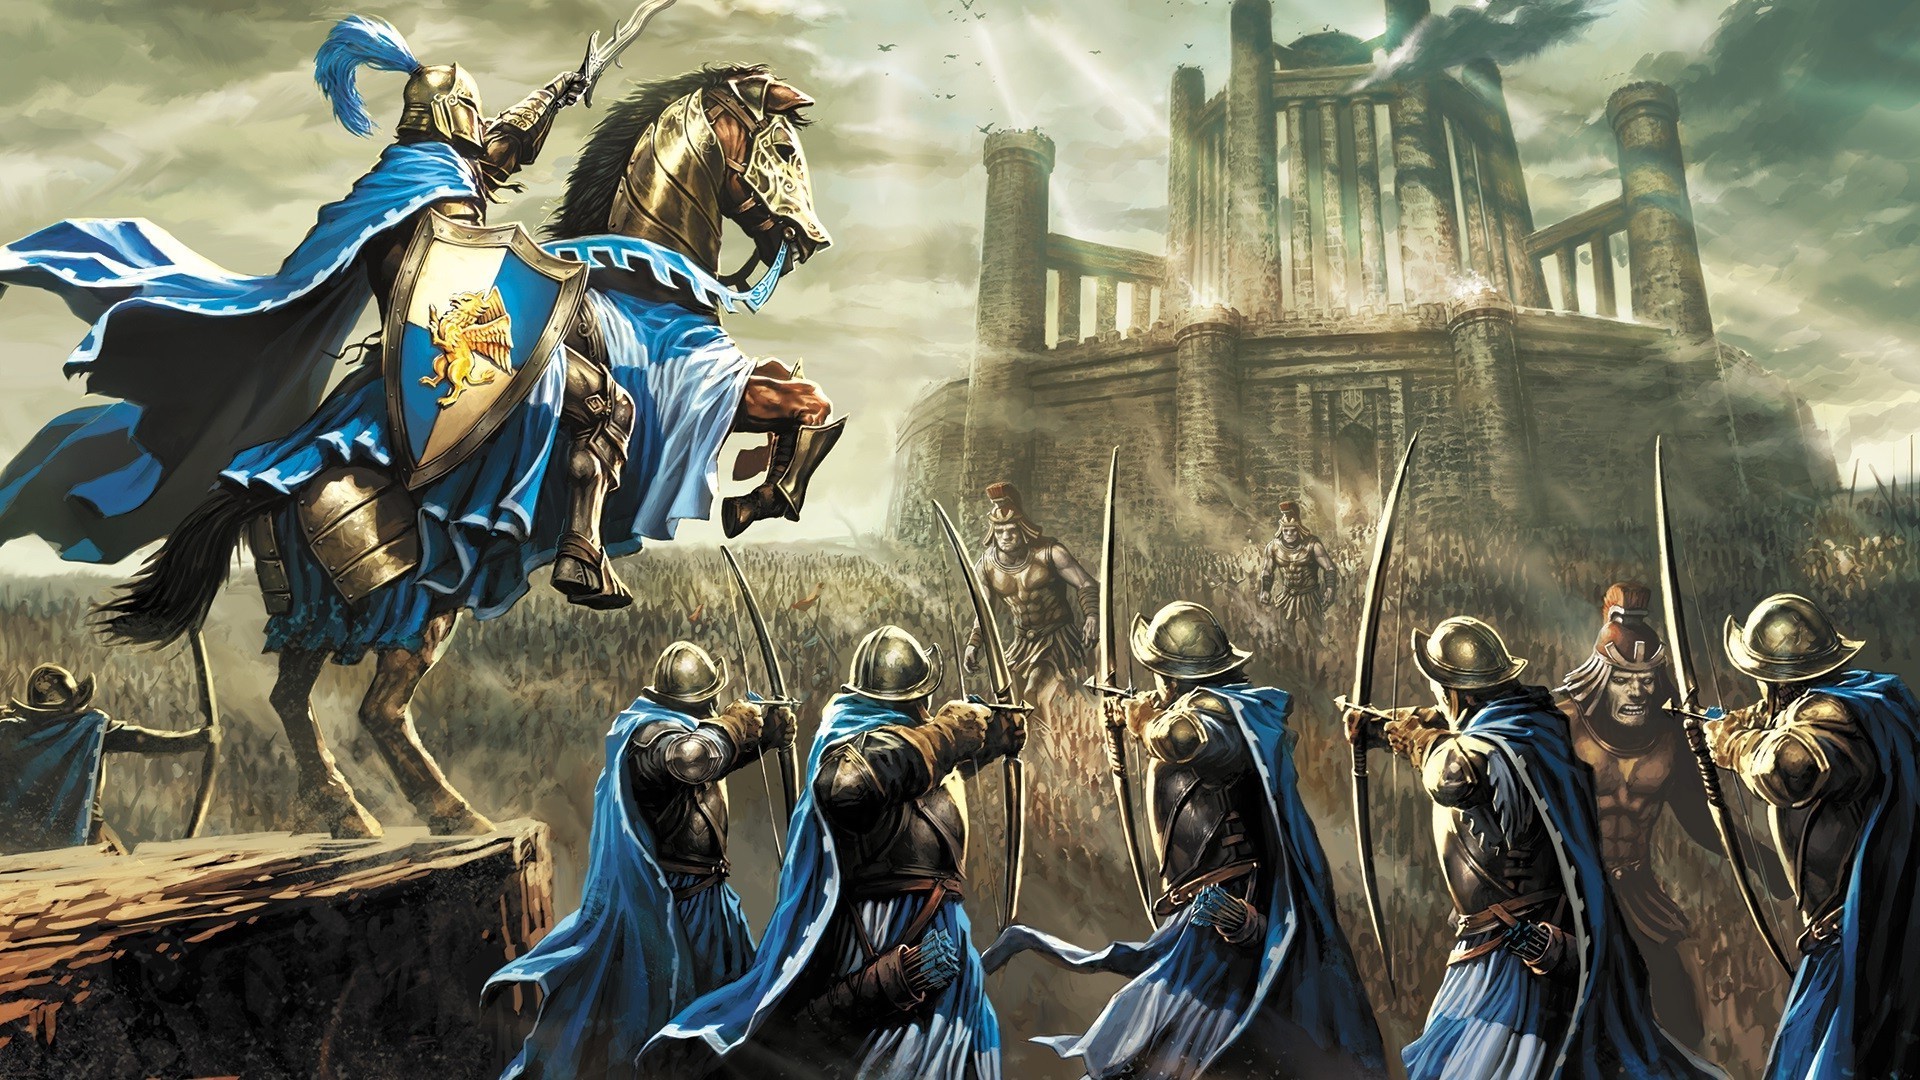 1920x1080 artwork, Fantasy Art, Heroes Of Might And Magic, Heroes Of Might And Magic  III, Video Games, Horse, War, Archer, Archers, Knight, Knights Wallpapers  HD ...